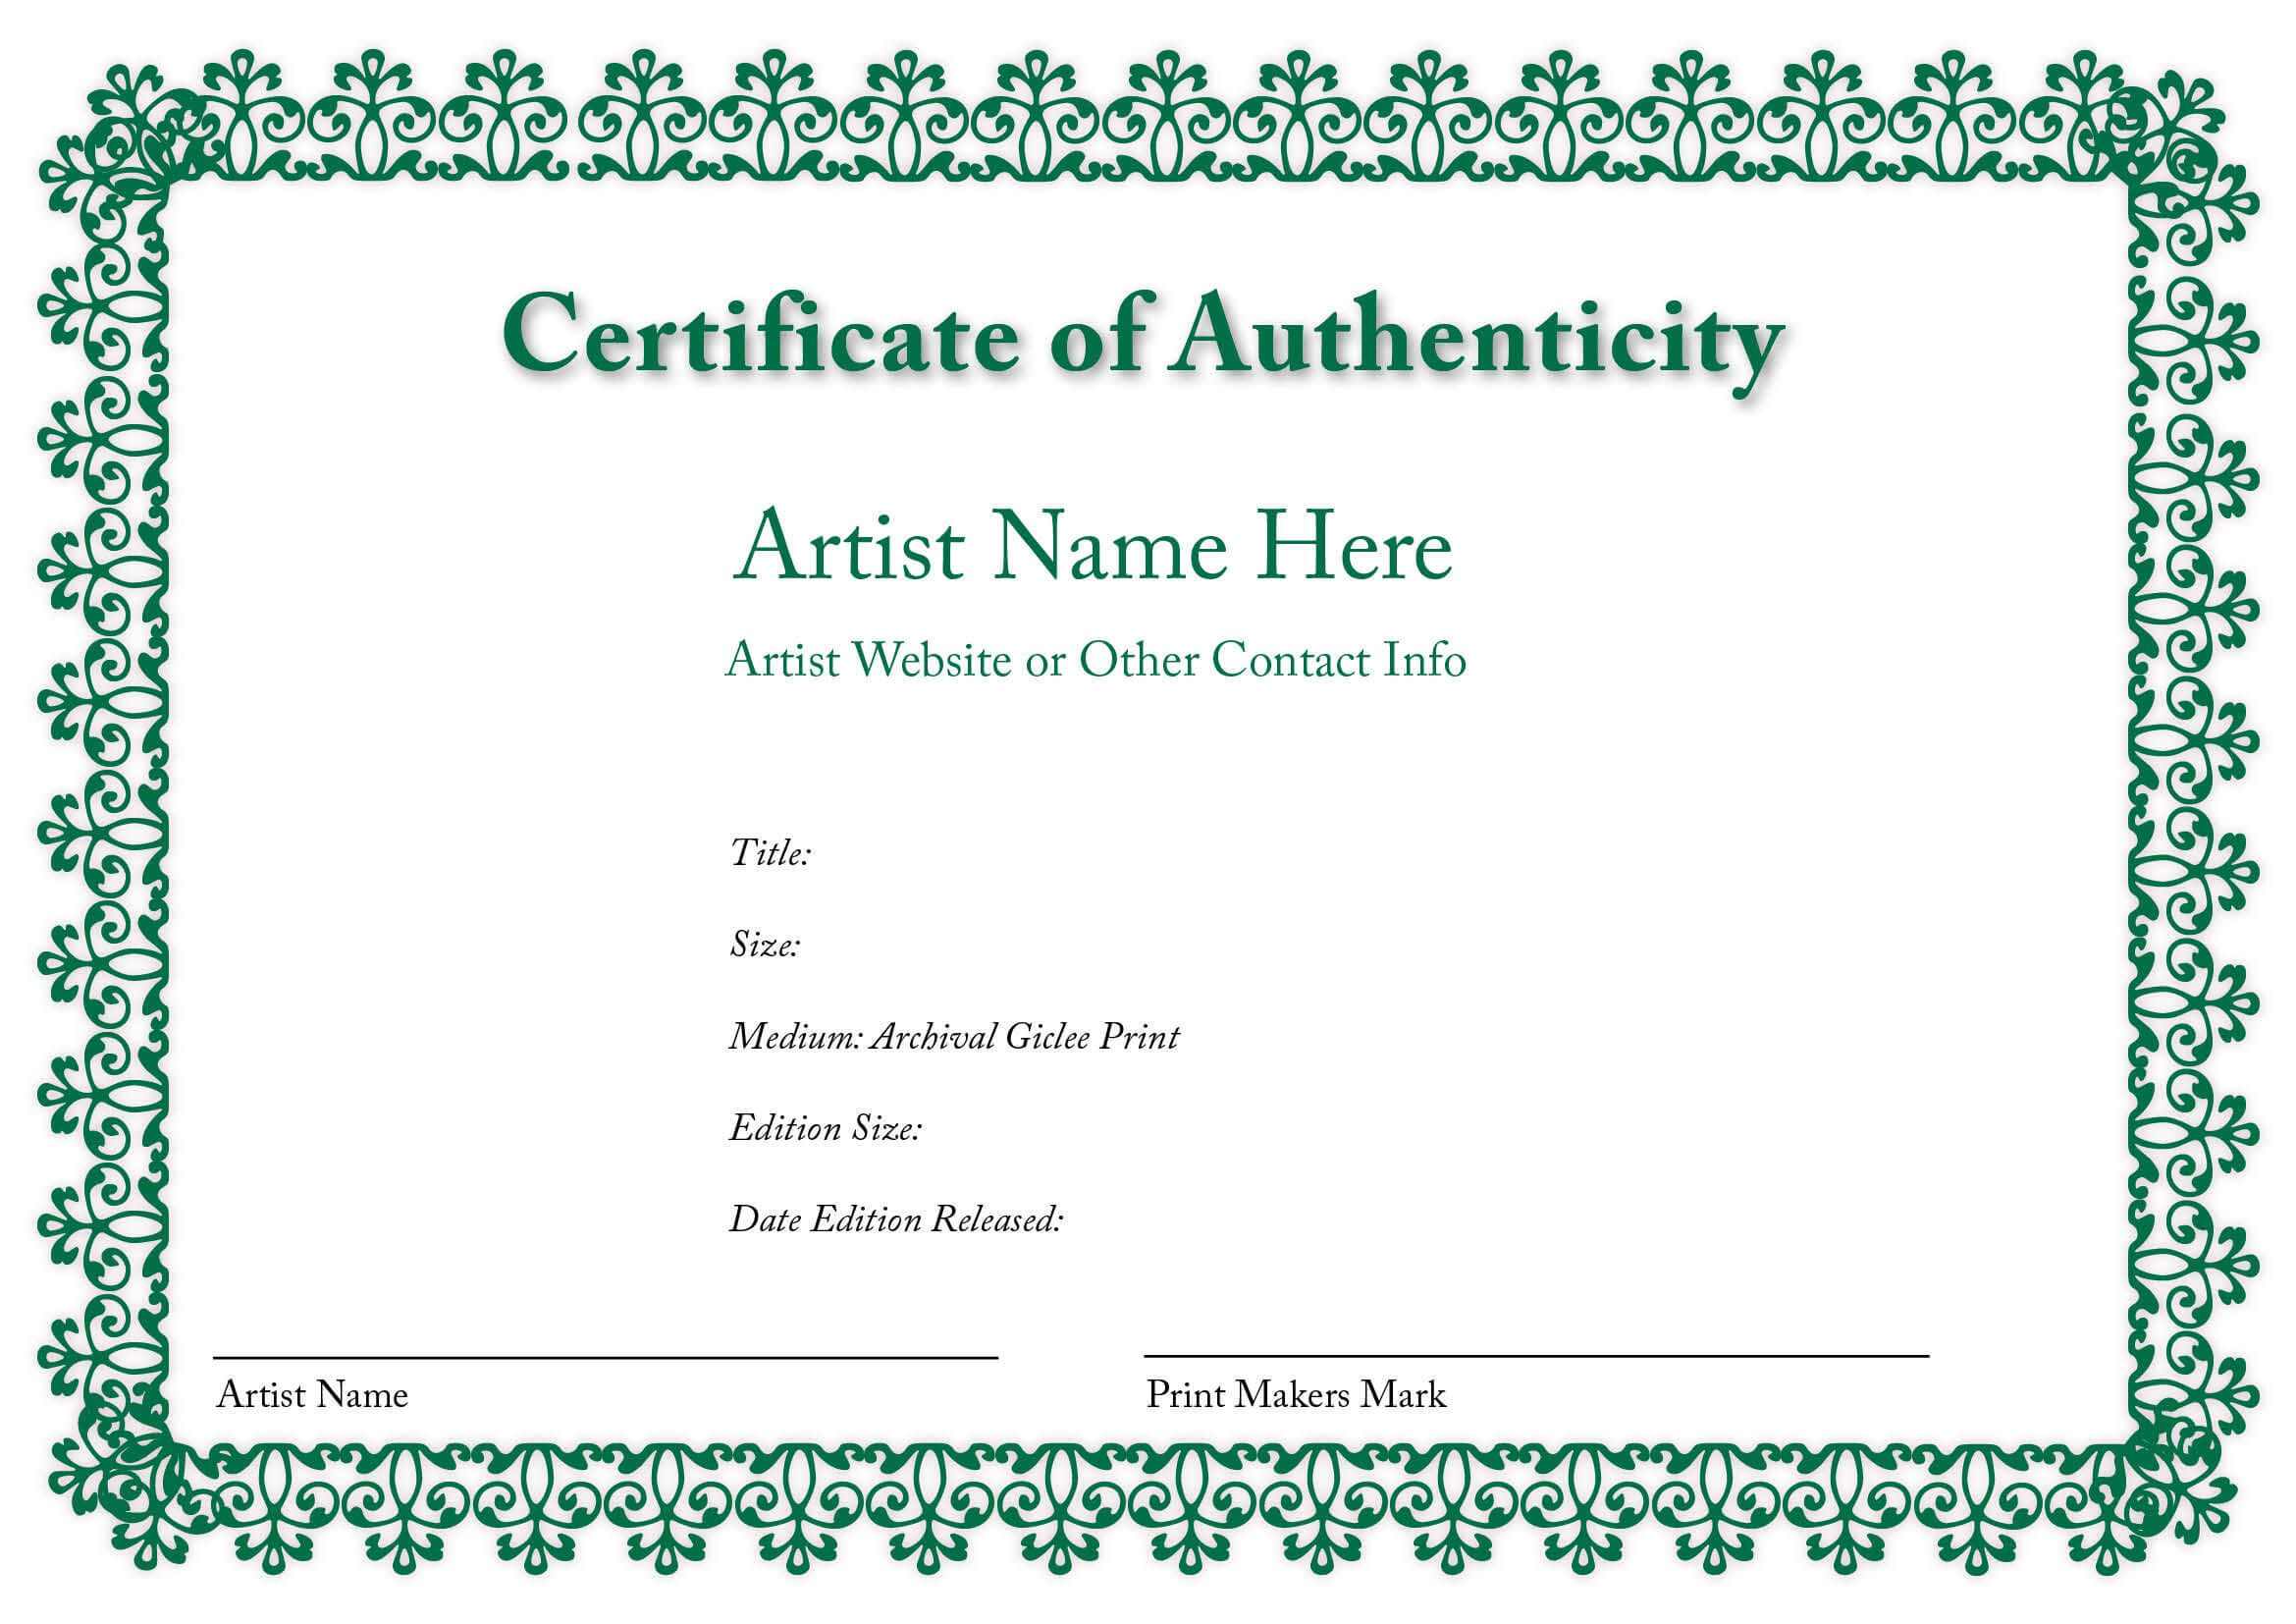 Certificate Of Authenticity Of An Art Print | Lettering Within Certificate Of Authenticity Photography Template